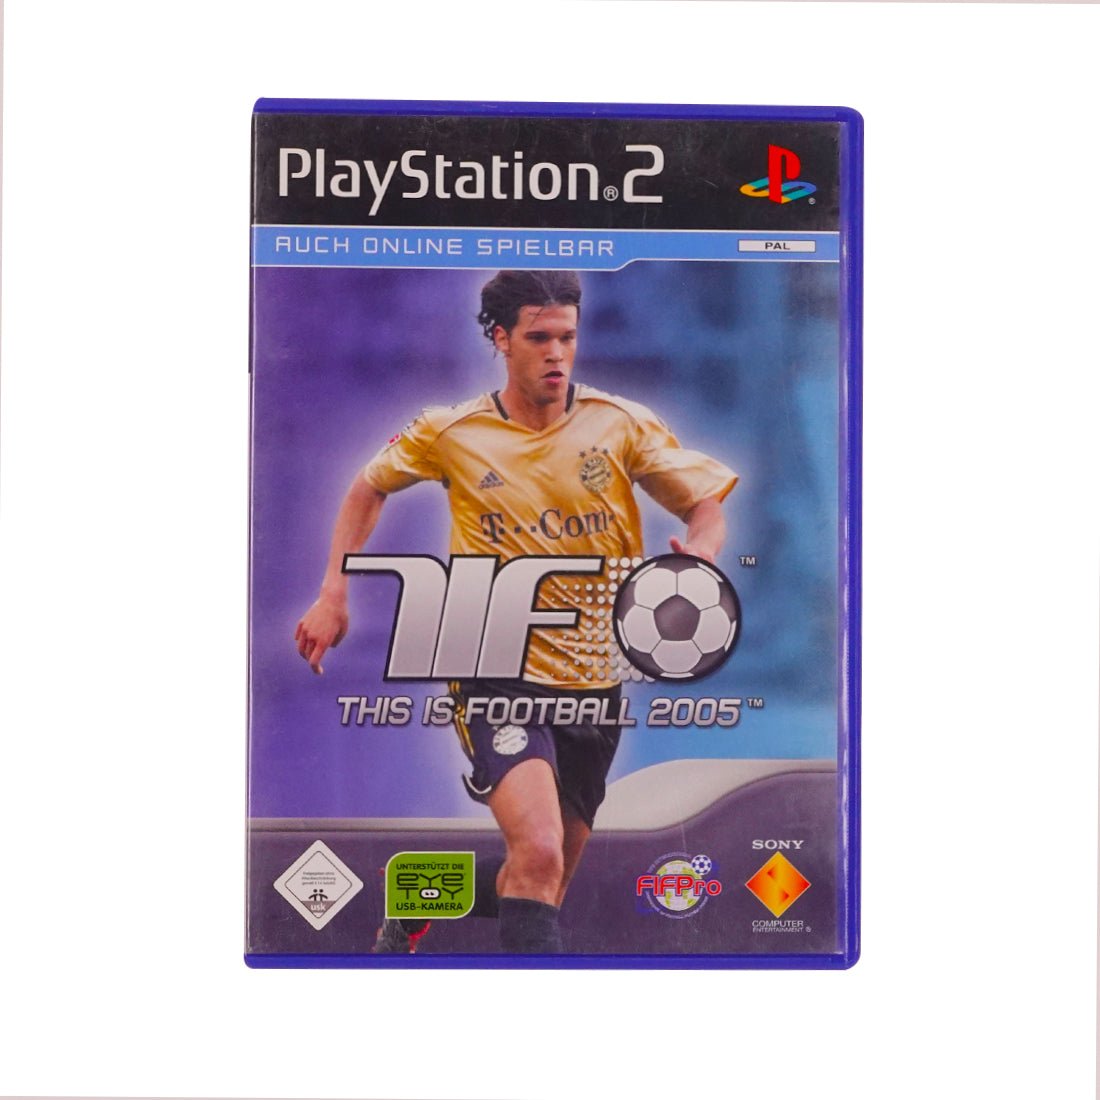 (Pre-Owned) This is Football 2005 - PlayStation 2 - Store 974 | ستور ٩٧٤